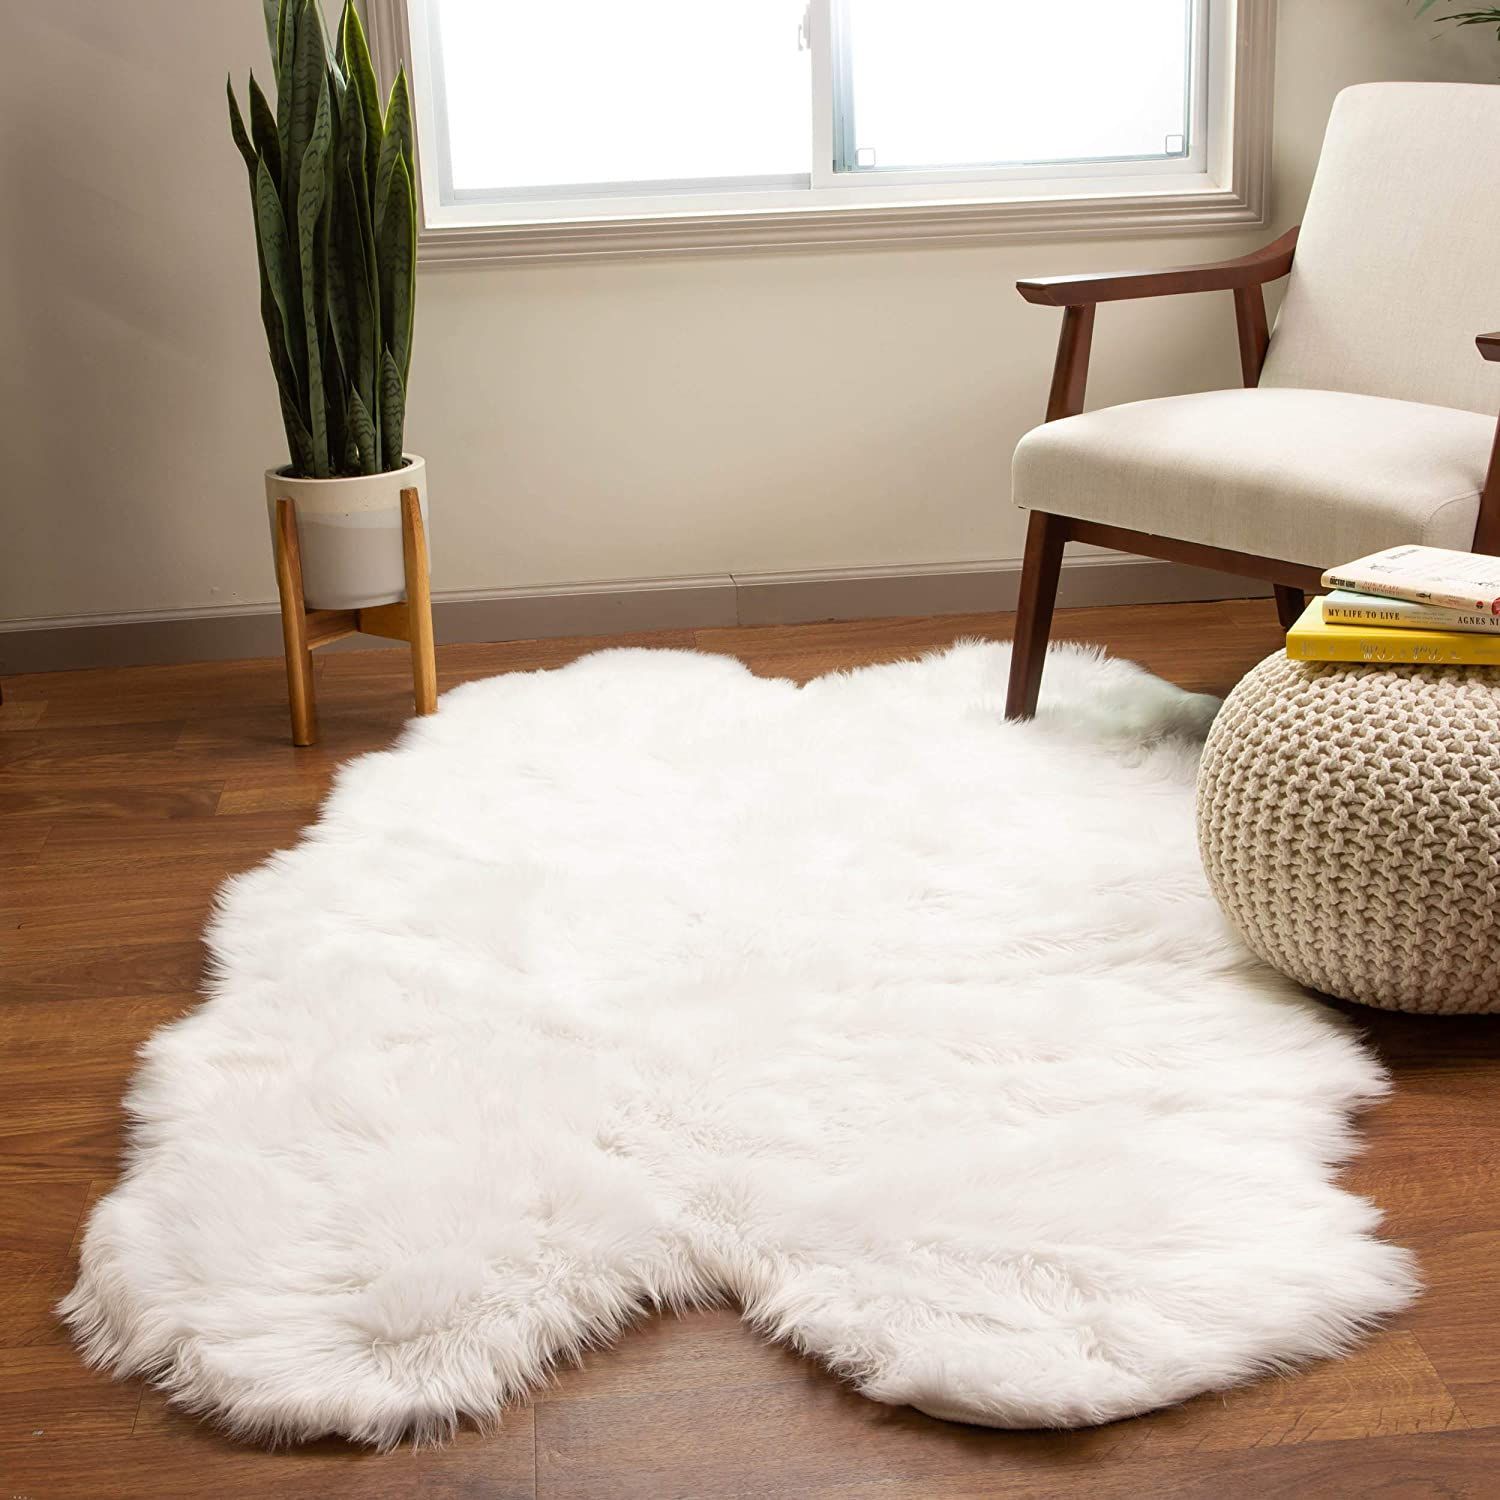 Indoor Fluffy Area Rugs Washable Non Shedding for Home Decor Bedroom Dormitory Zwgmu Ultra Soft Living Room Rug Modern Shaggy Rugs Extra Large Small Medium Rectangular Size Grey 160 x 230 cm 